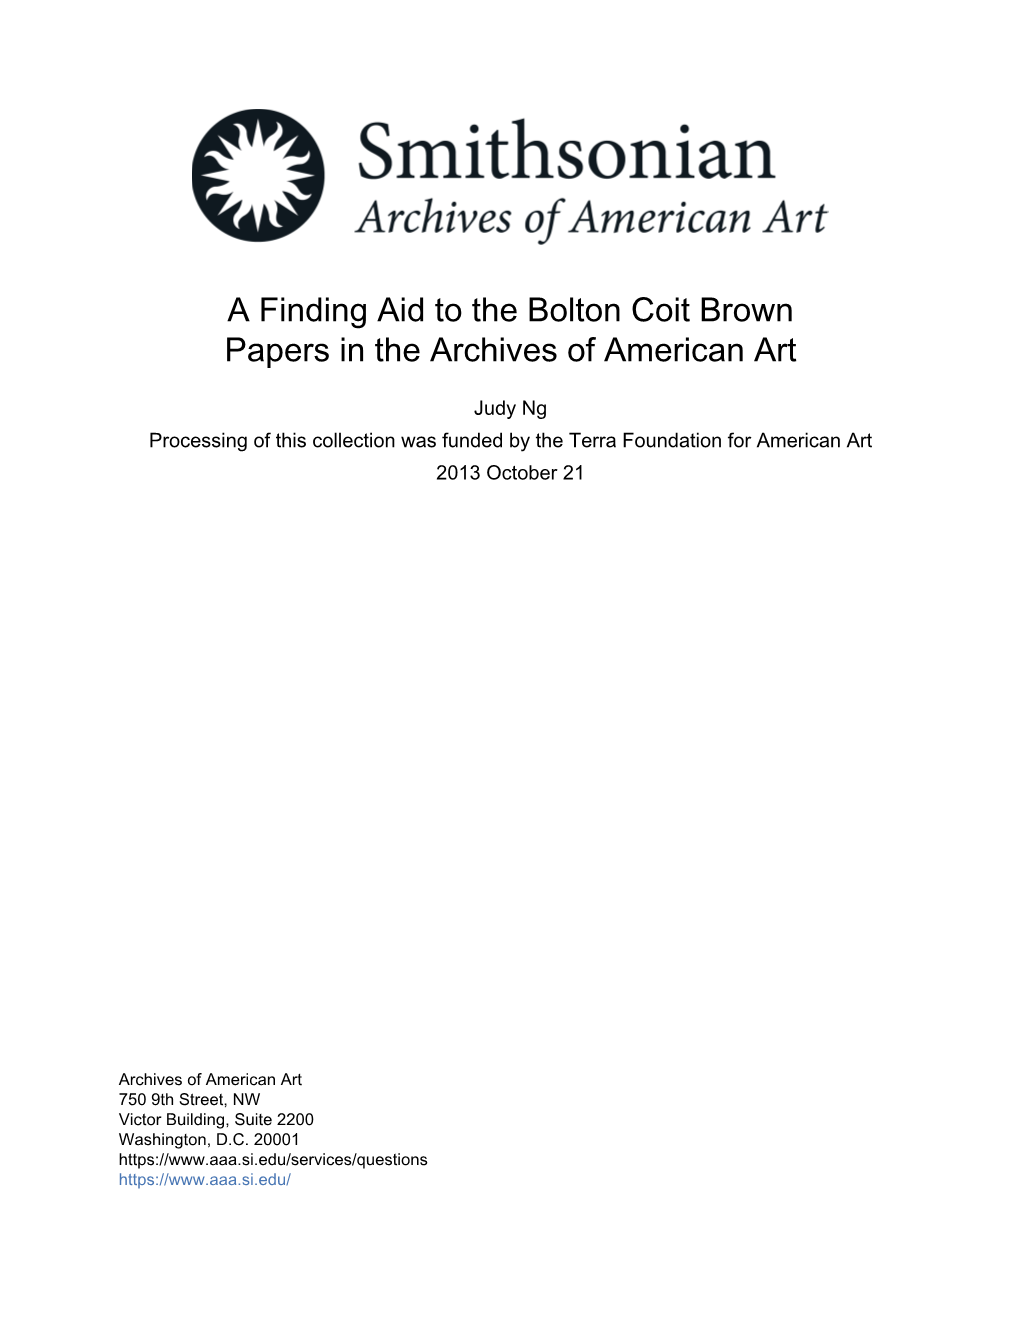 A Finding Aid to the Bolton Coit Brown Papers in the Archives of American Art